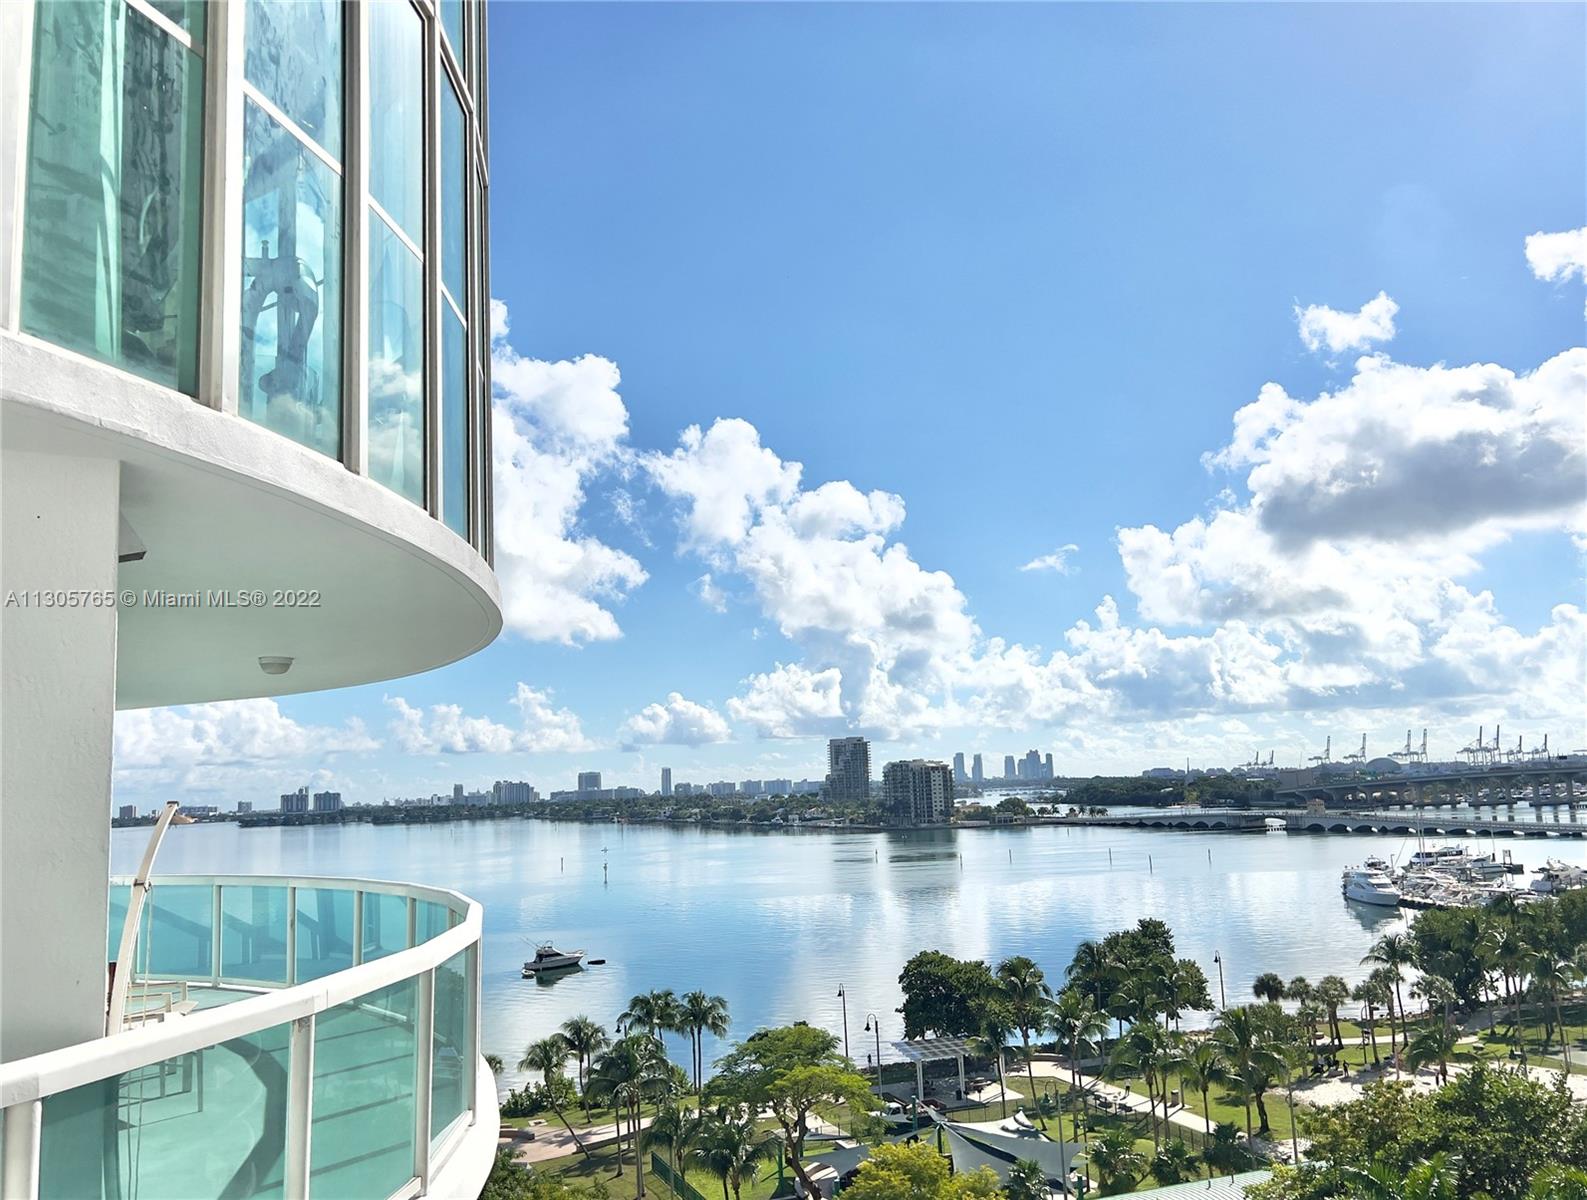 Its size and extensive extensive outdoor space overlooking Biscayne Bay make this very large apt (larger than tax roll) a truly one of a kind living experience. Covered patio estimated to be around 600 sqft and allows for a true indoor / outdoor living experience as well as ample opportunity for entertainment. Great Edgewater location, across the street from Margaret Pace Park. This is a very unique apartment, especially in this price range.